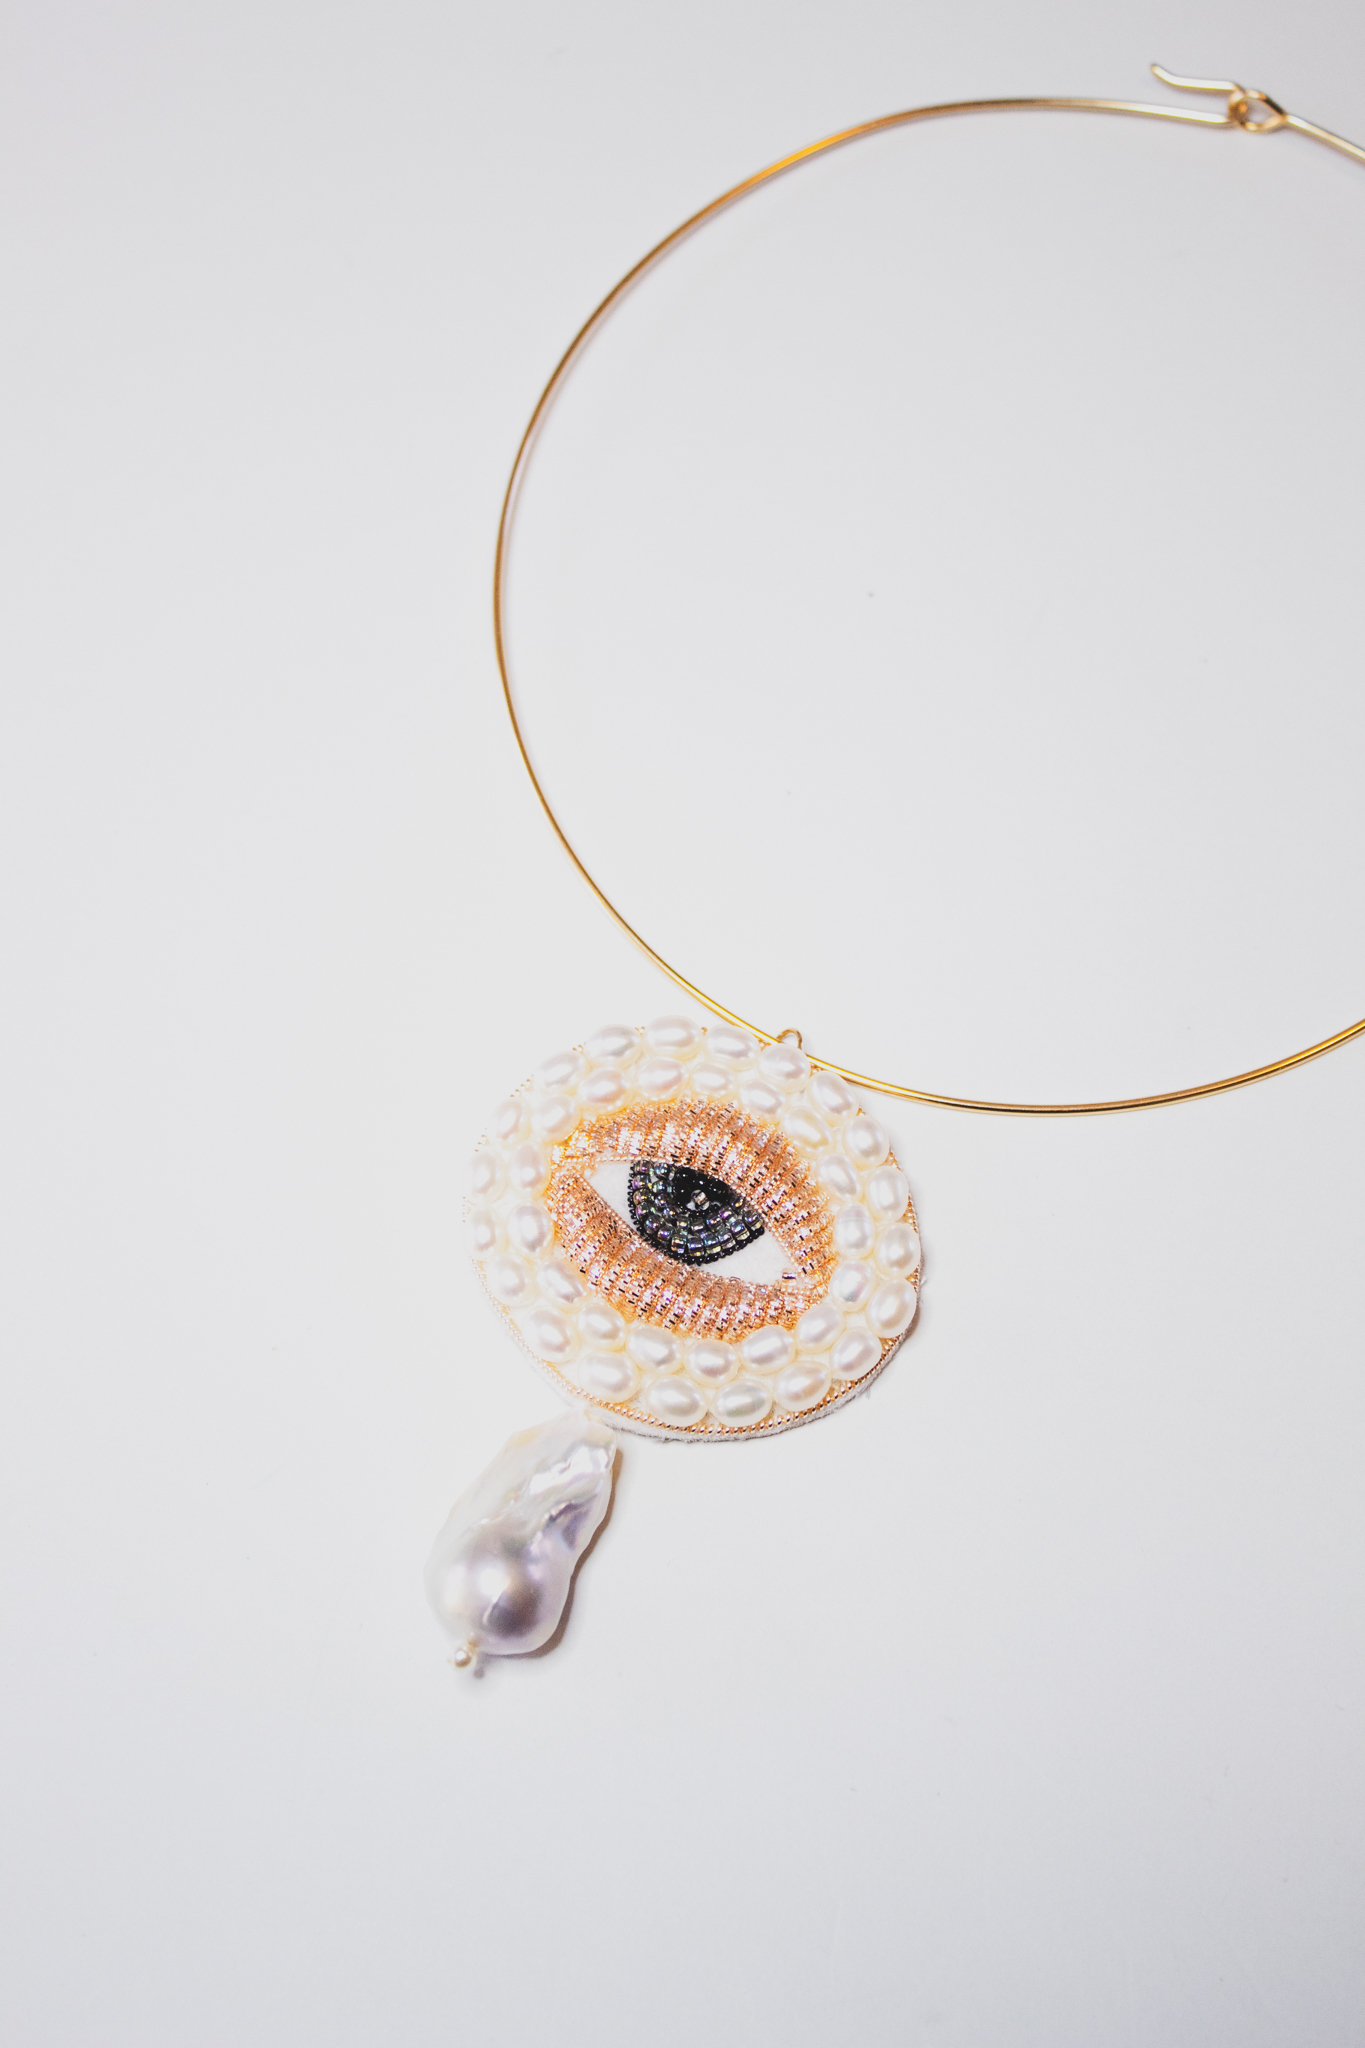 Necklace photographed on a stark white background. The necklace features an embroidered eye, using metals used to embellish the surface. There are pearl-like obejcts surrounded the eye and a larger stone hanging from it. 